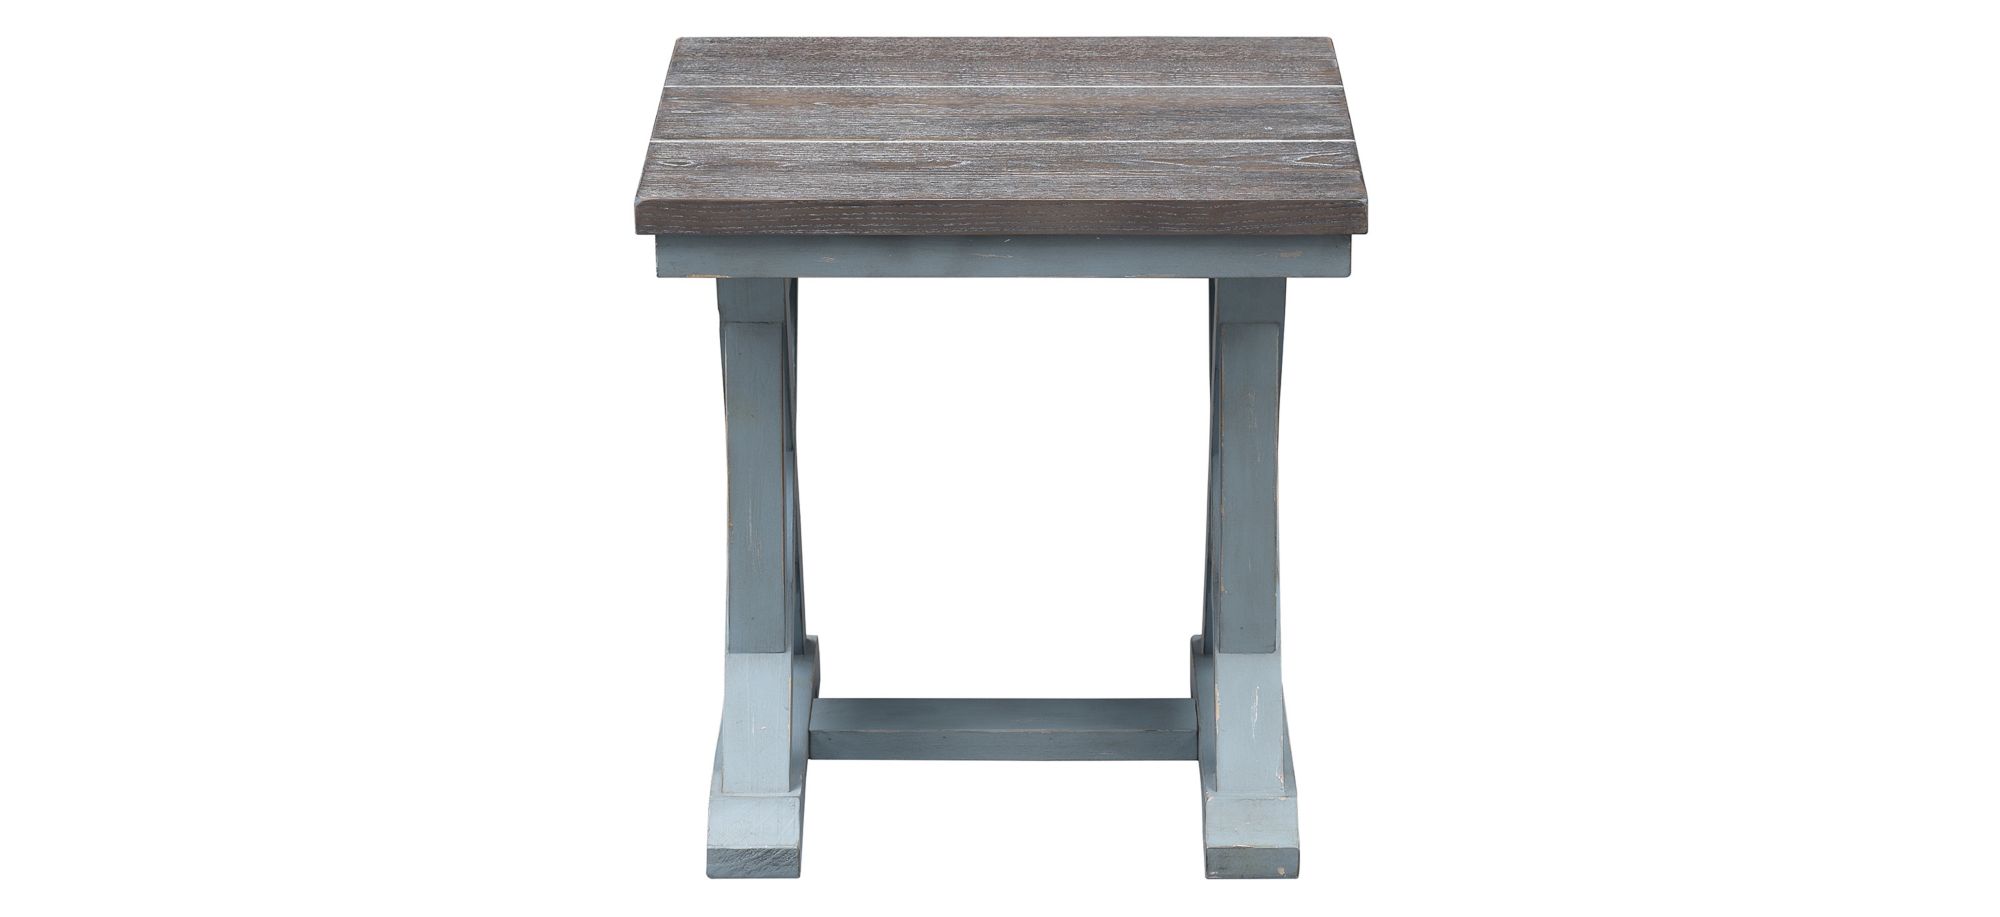 Bar Harbor End Table in Bar Harbor Blue by Coast To Coast Imports